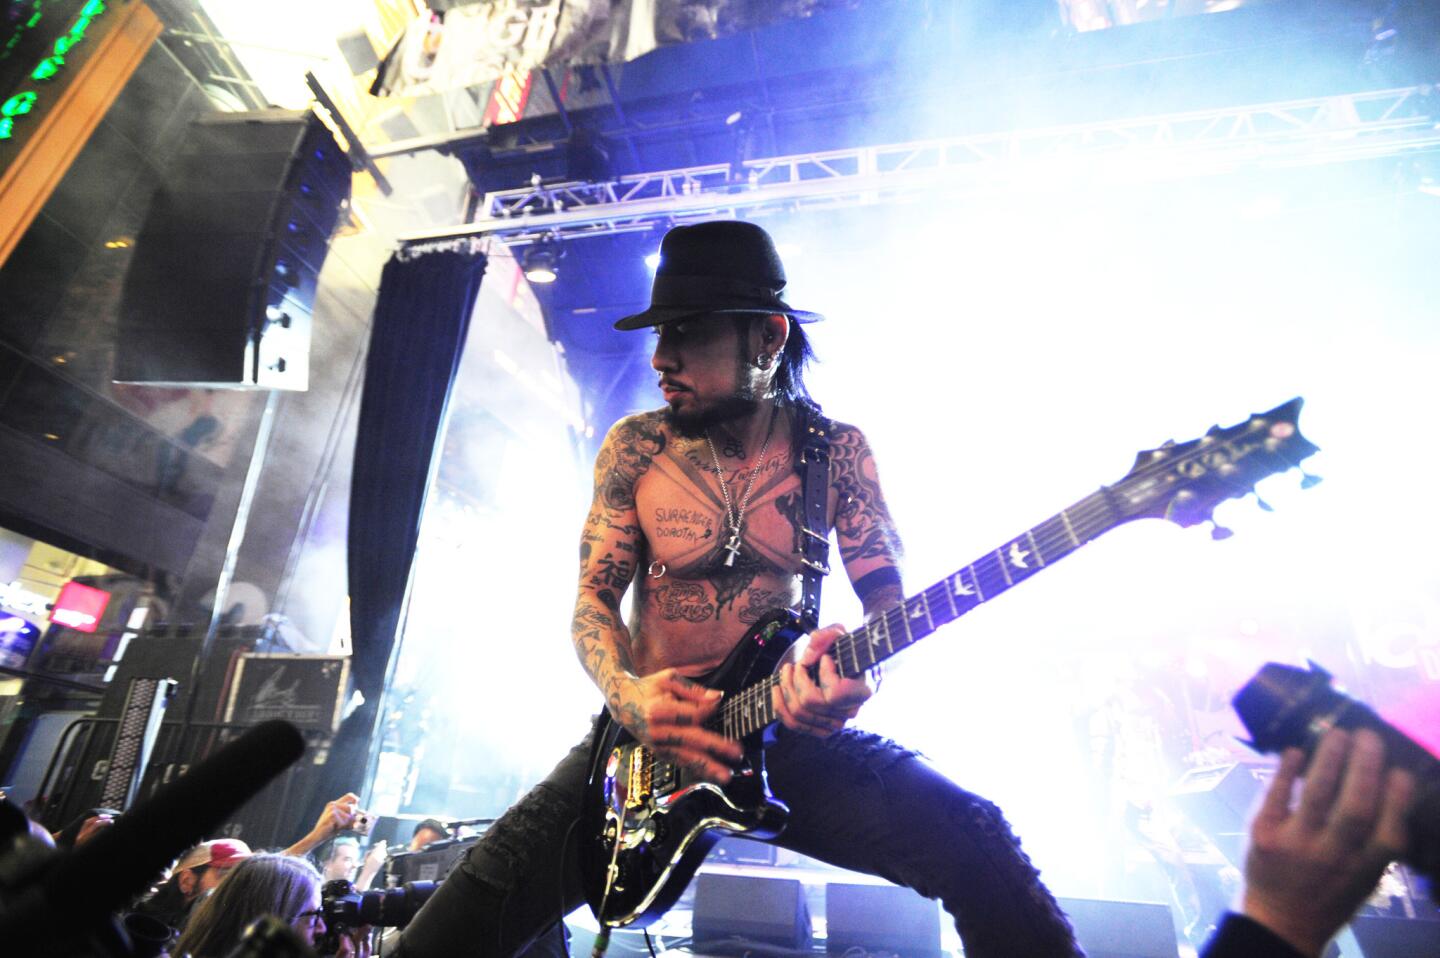 Dave Navarro worked with Gabrielle Francis, a naturopathic doctor who wrote "The Rockstar Remedy: A Rock & Roll Doctor's Prescription for Living a Long, Healthy Life."